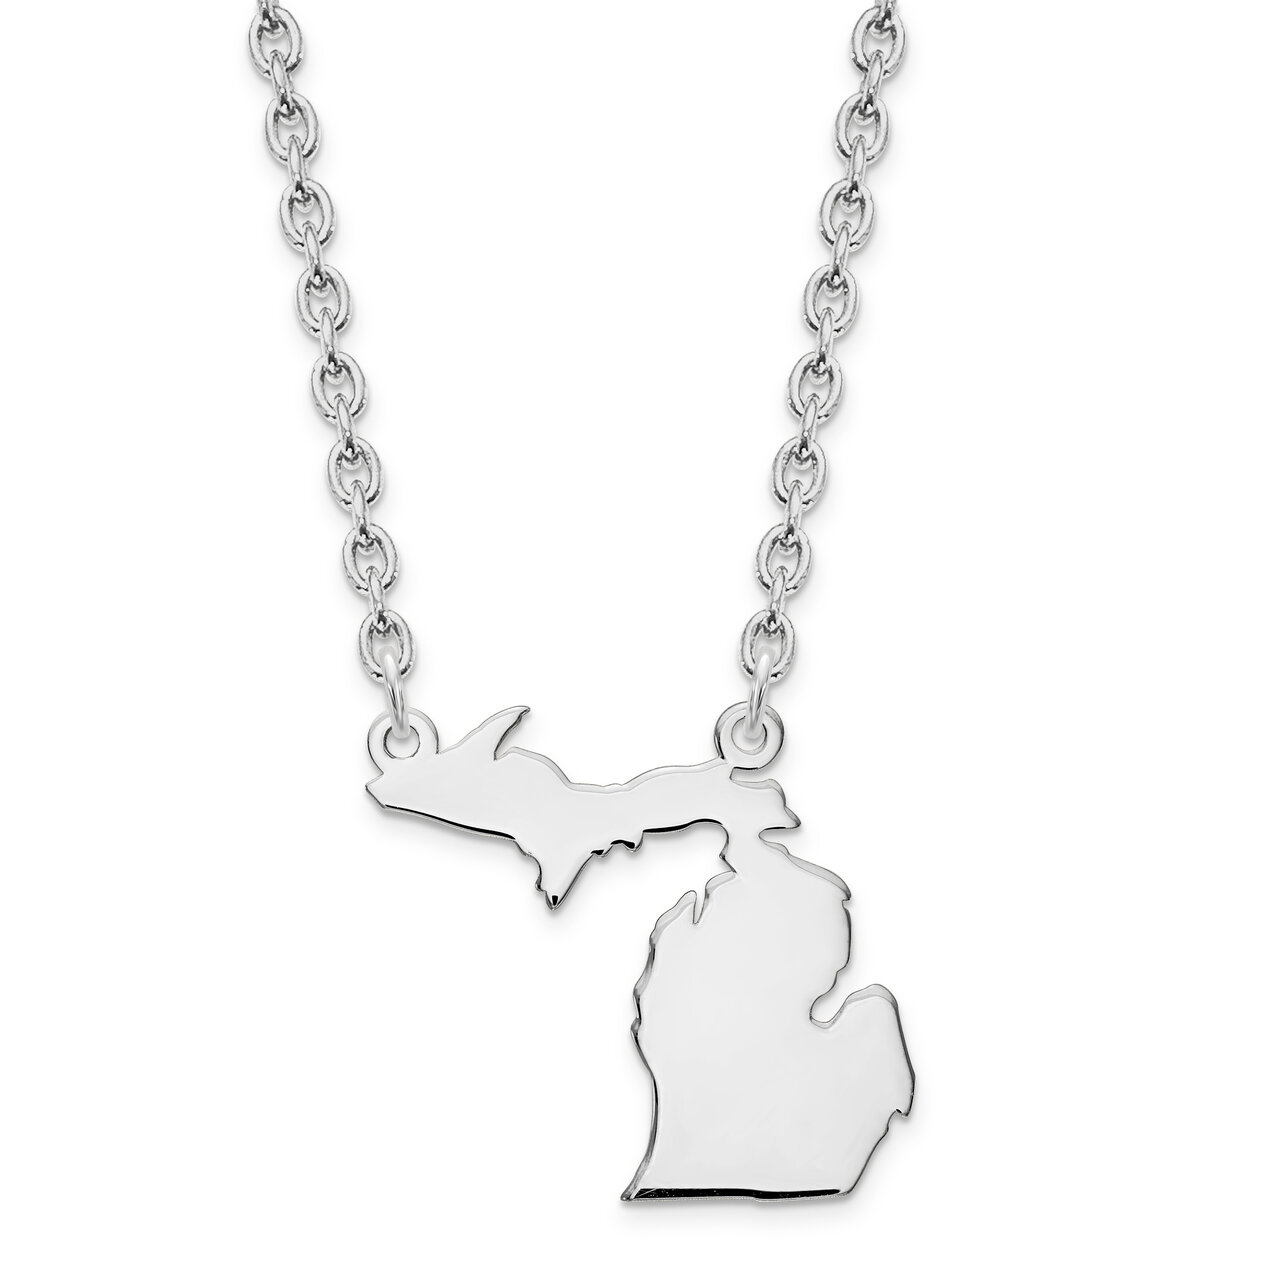 Michigan State Pendant Necklace with Chain Sterling Silver Engravable XNA706SS-MI